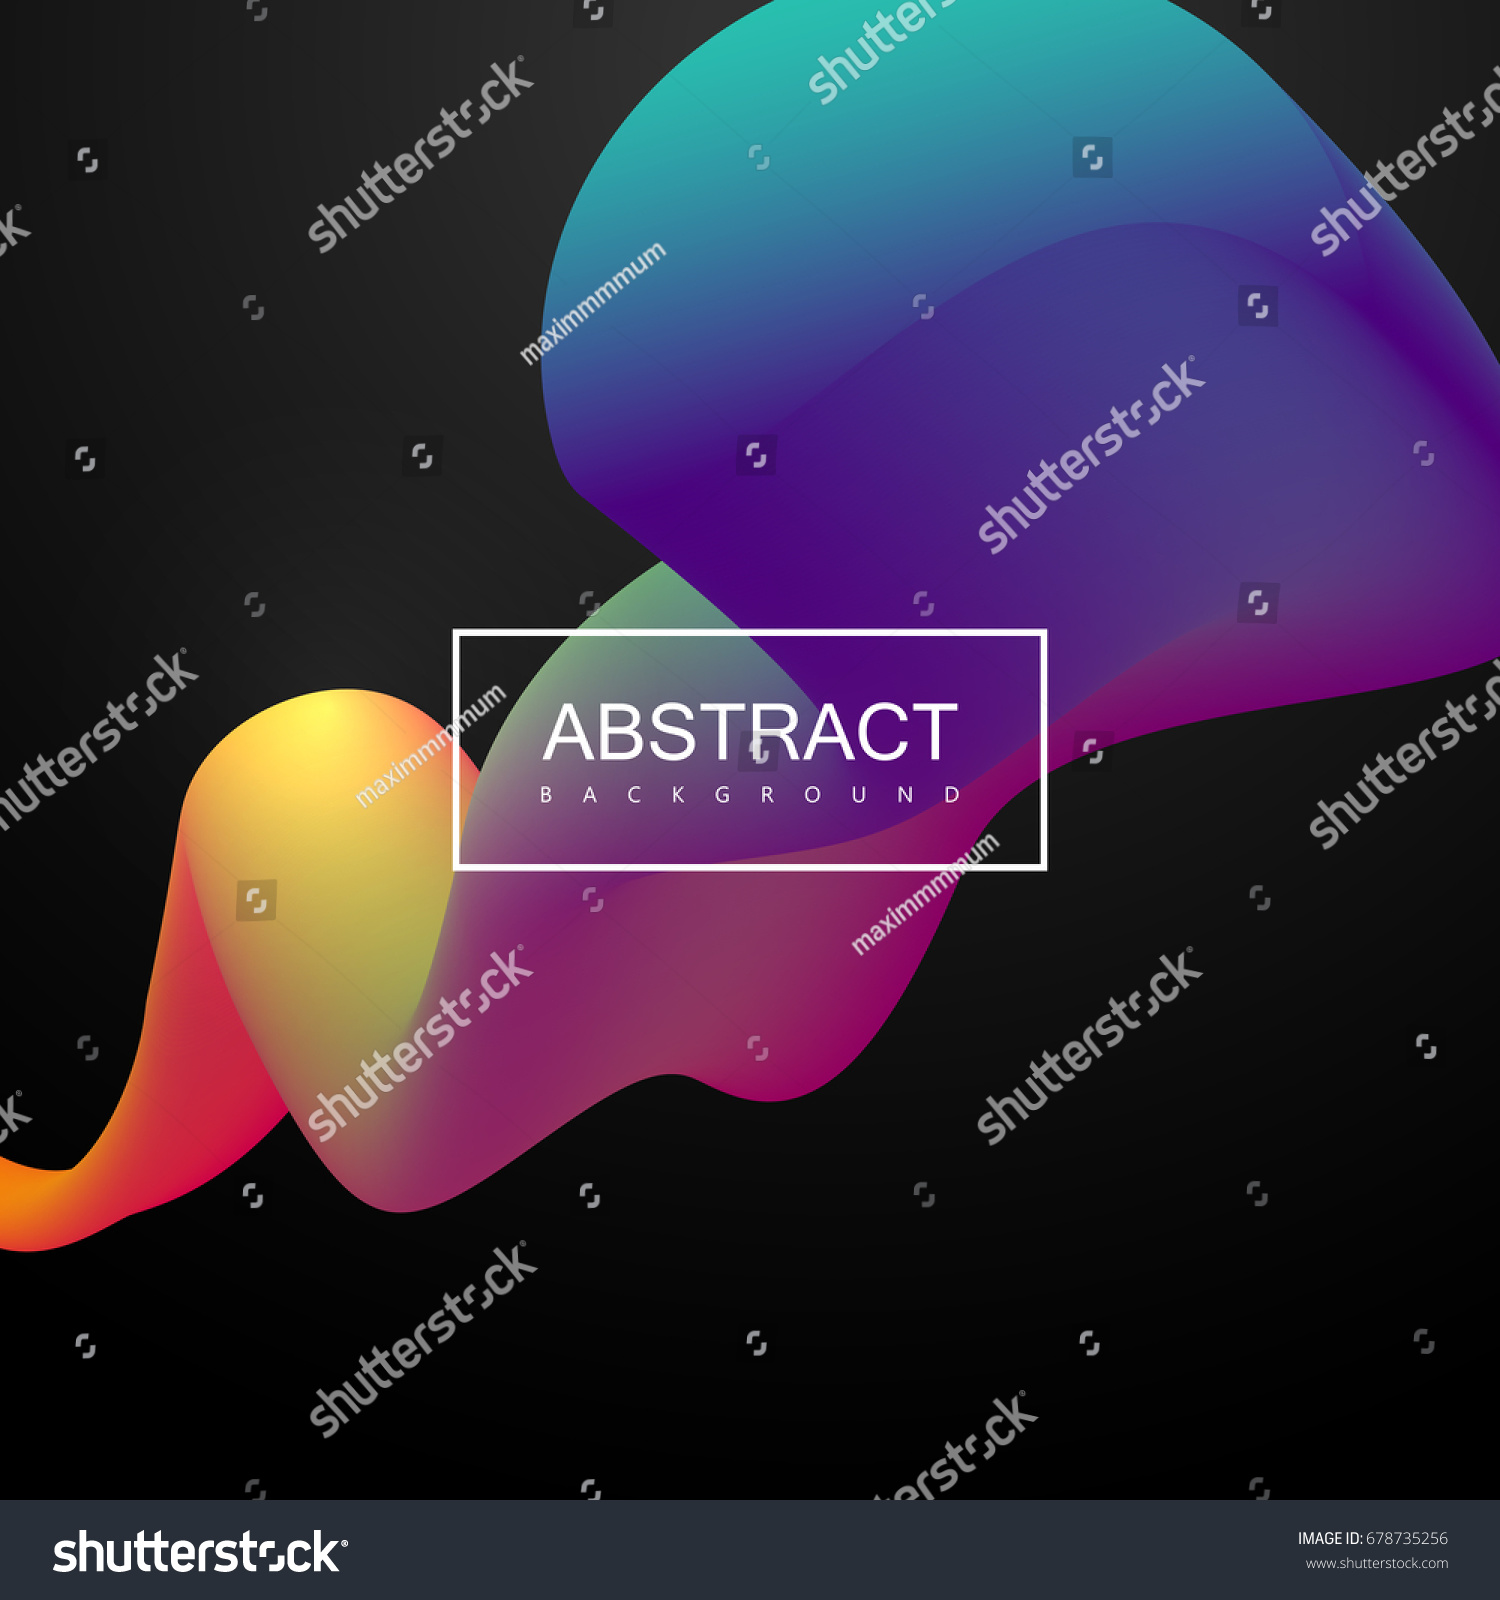 Abstract 3 D Colorful Shape Vector Artistic Stock Vector 678735256 ...